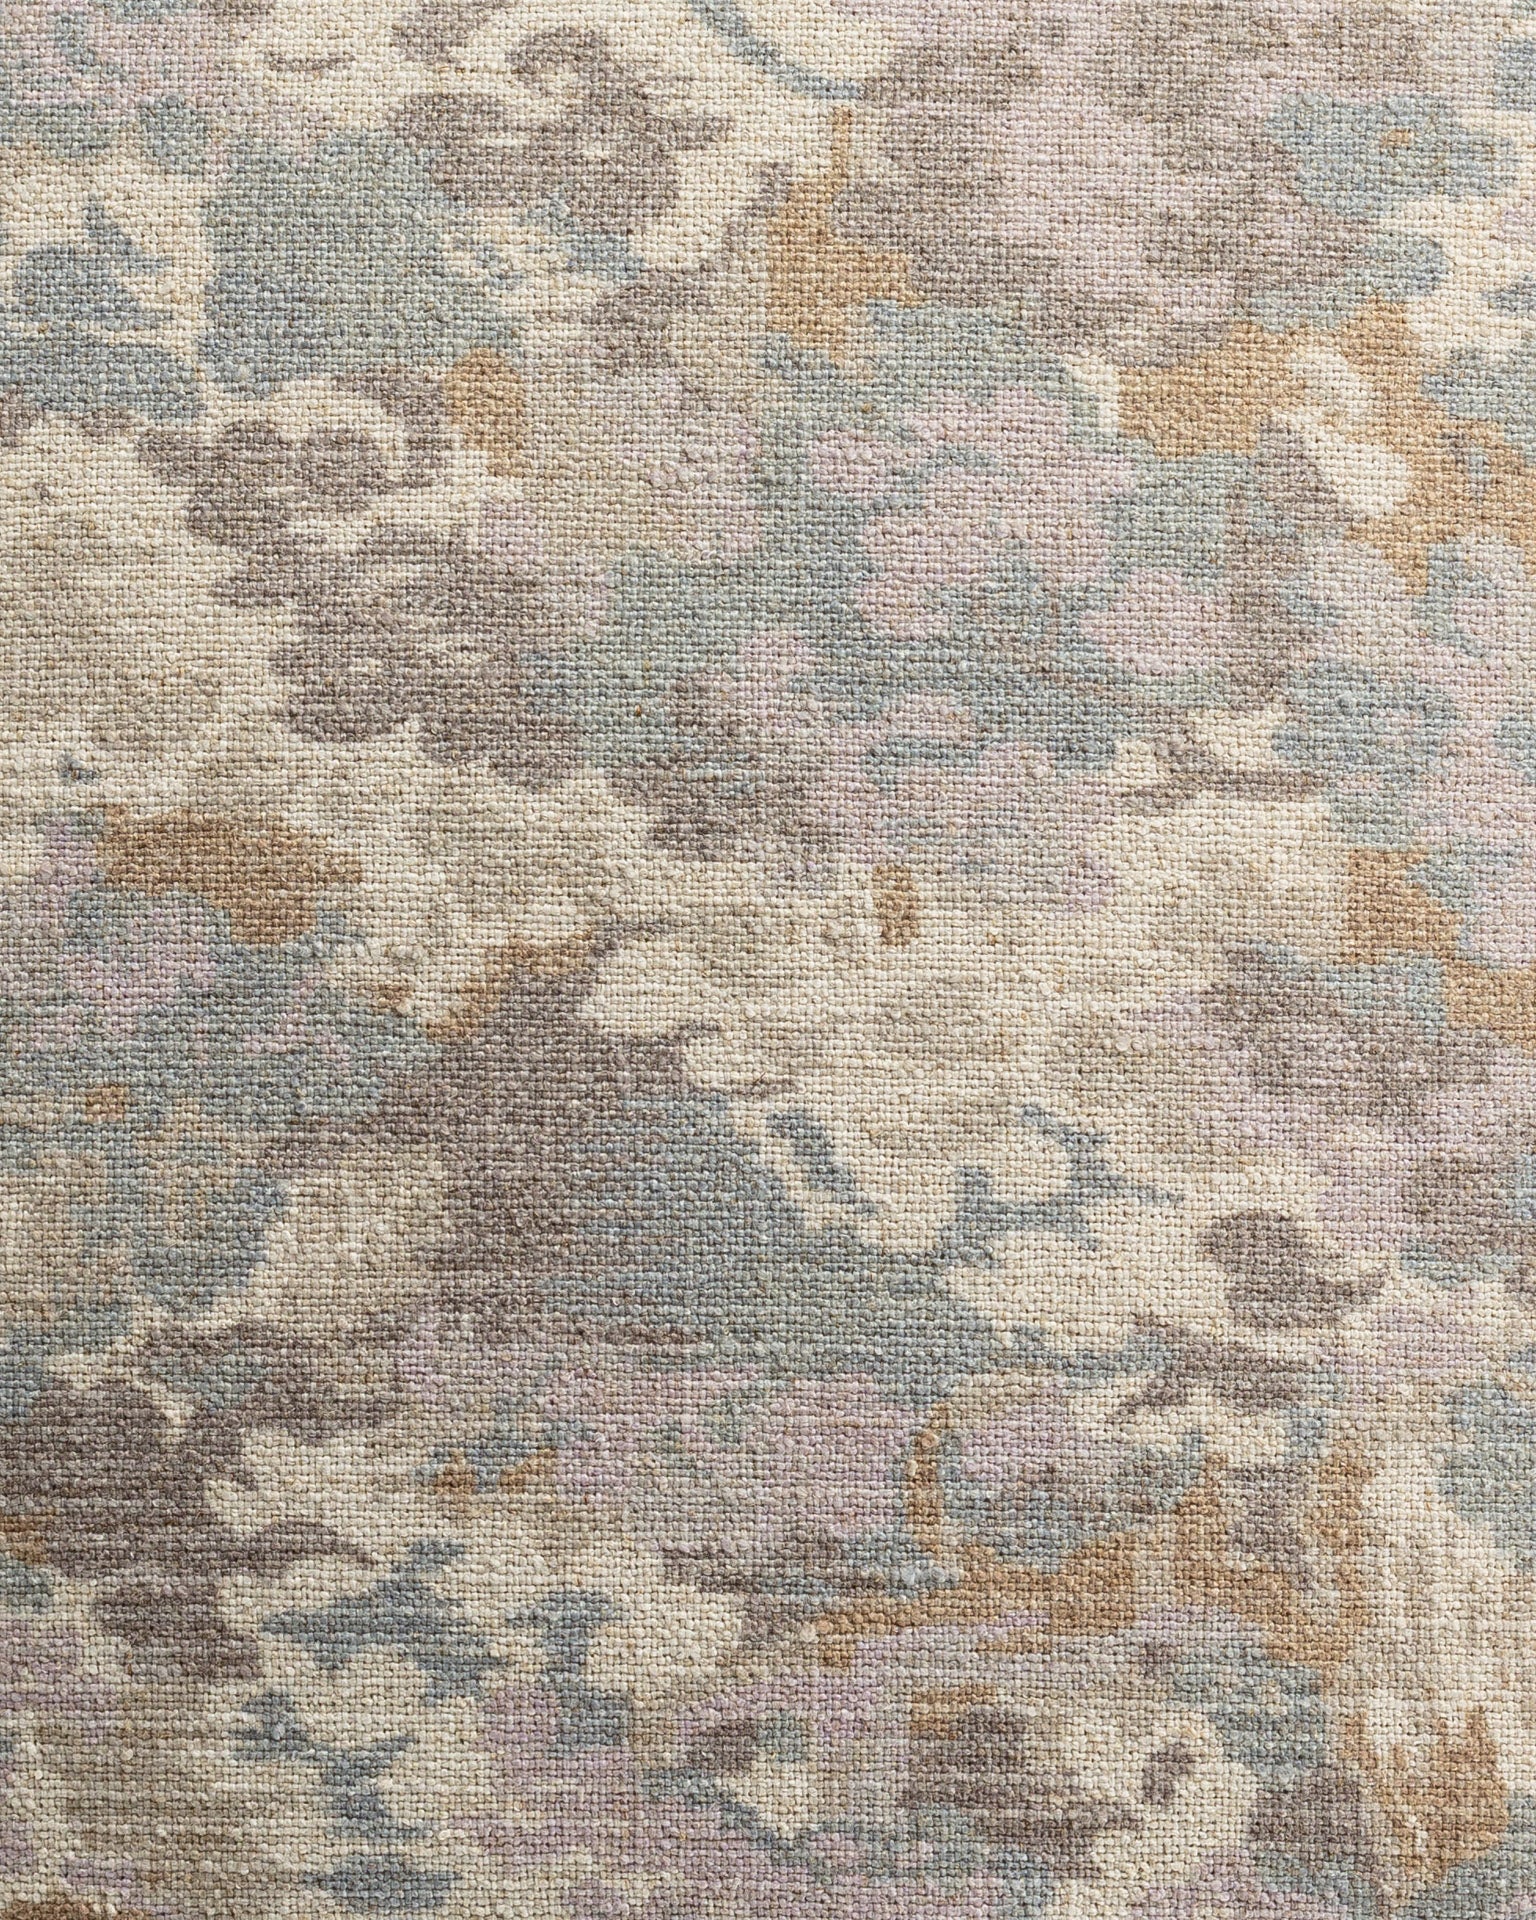 Close-up of a textured carpet in a bungalow with a floral pattern in muted shades of blue, beige, and purple Gabby Imperial Pastel Pillow 26x26.